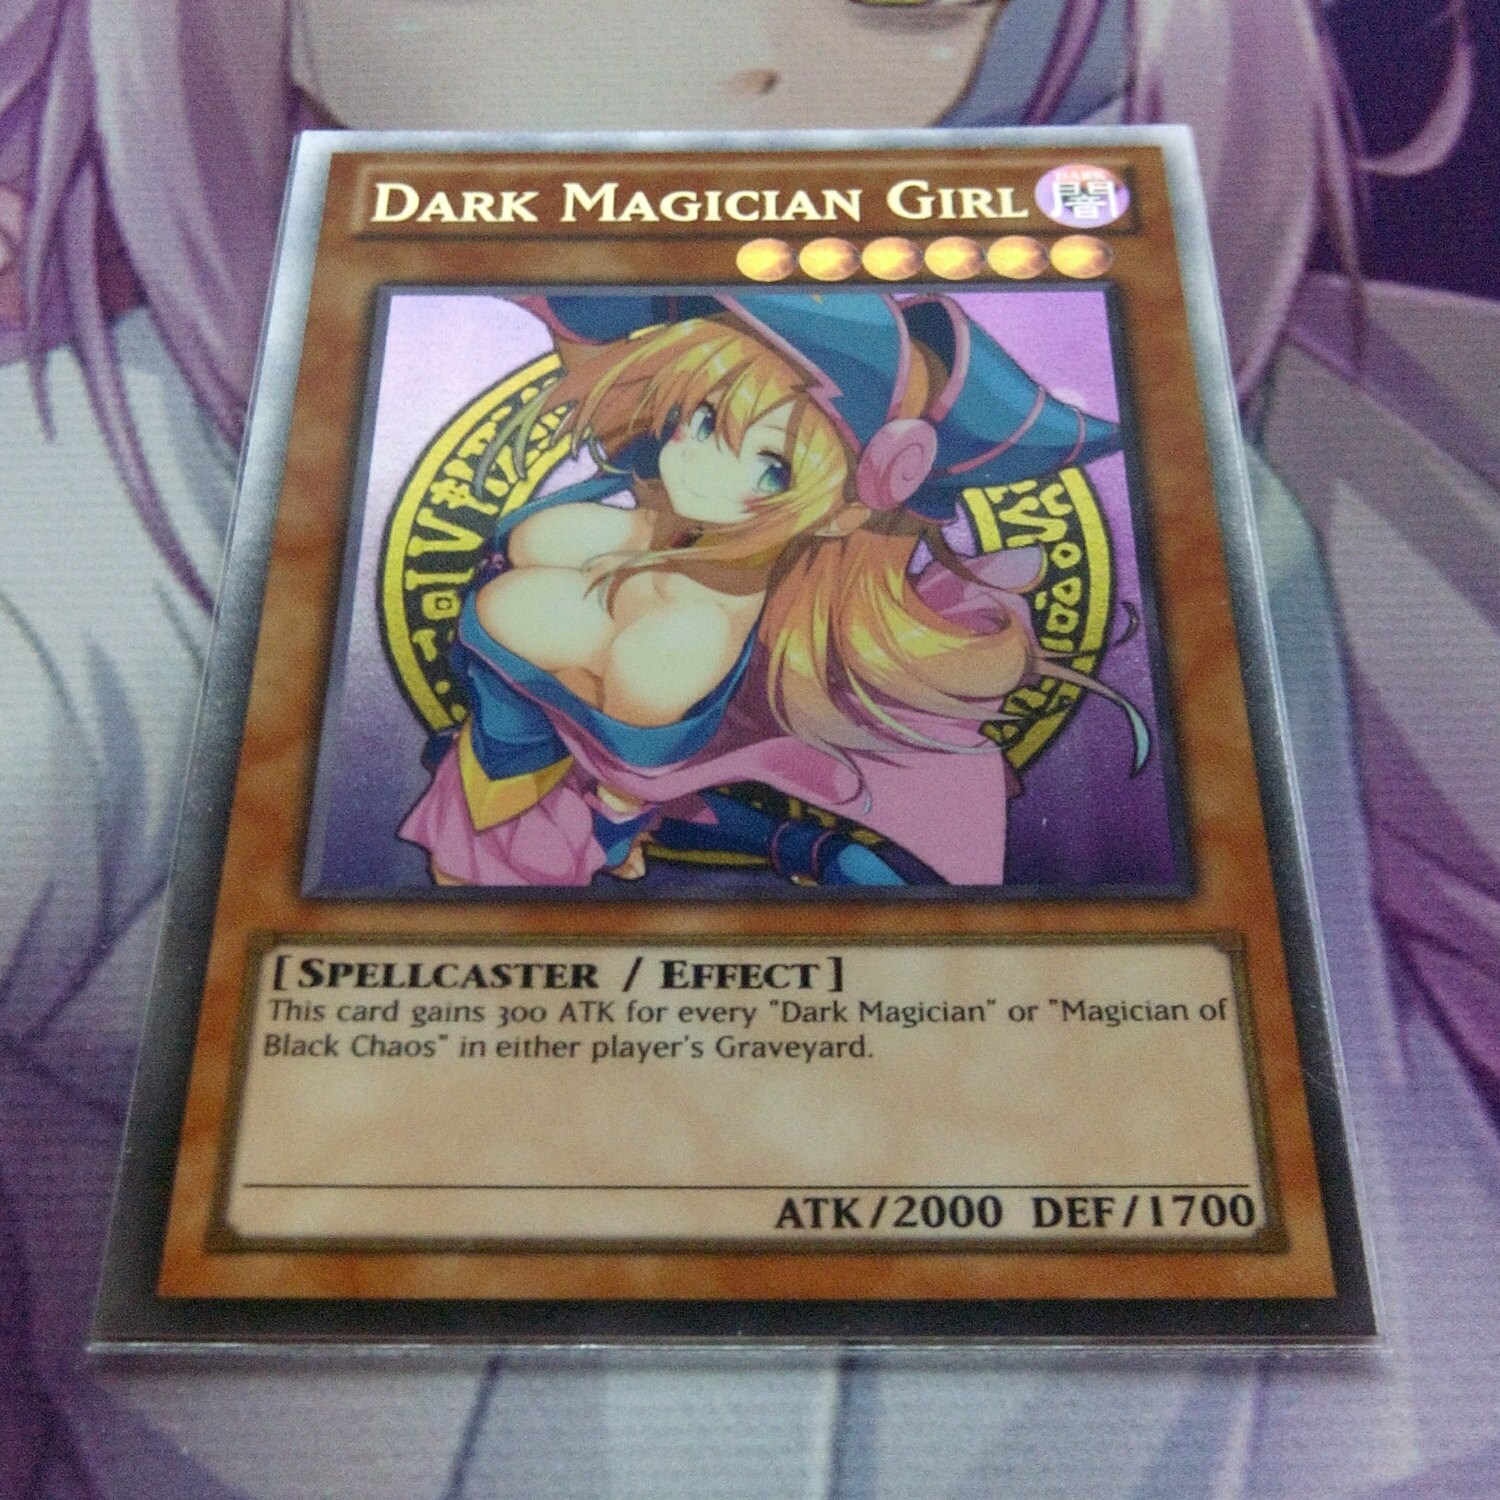 Free booty pic yugioh card